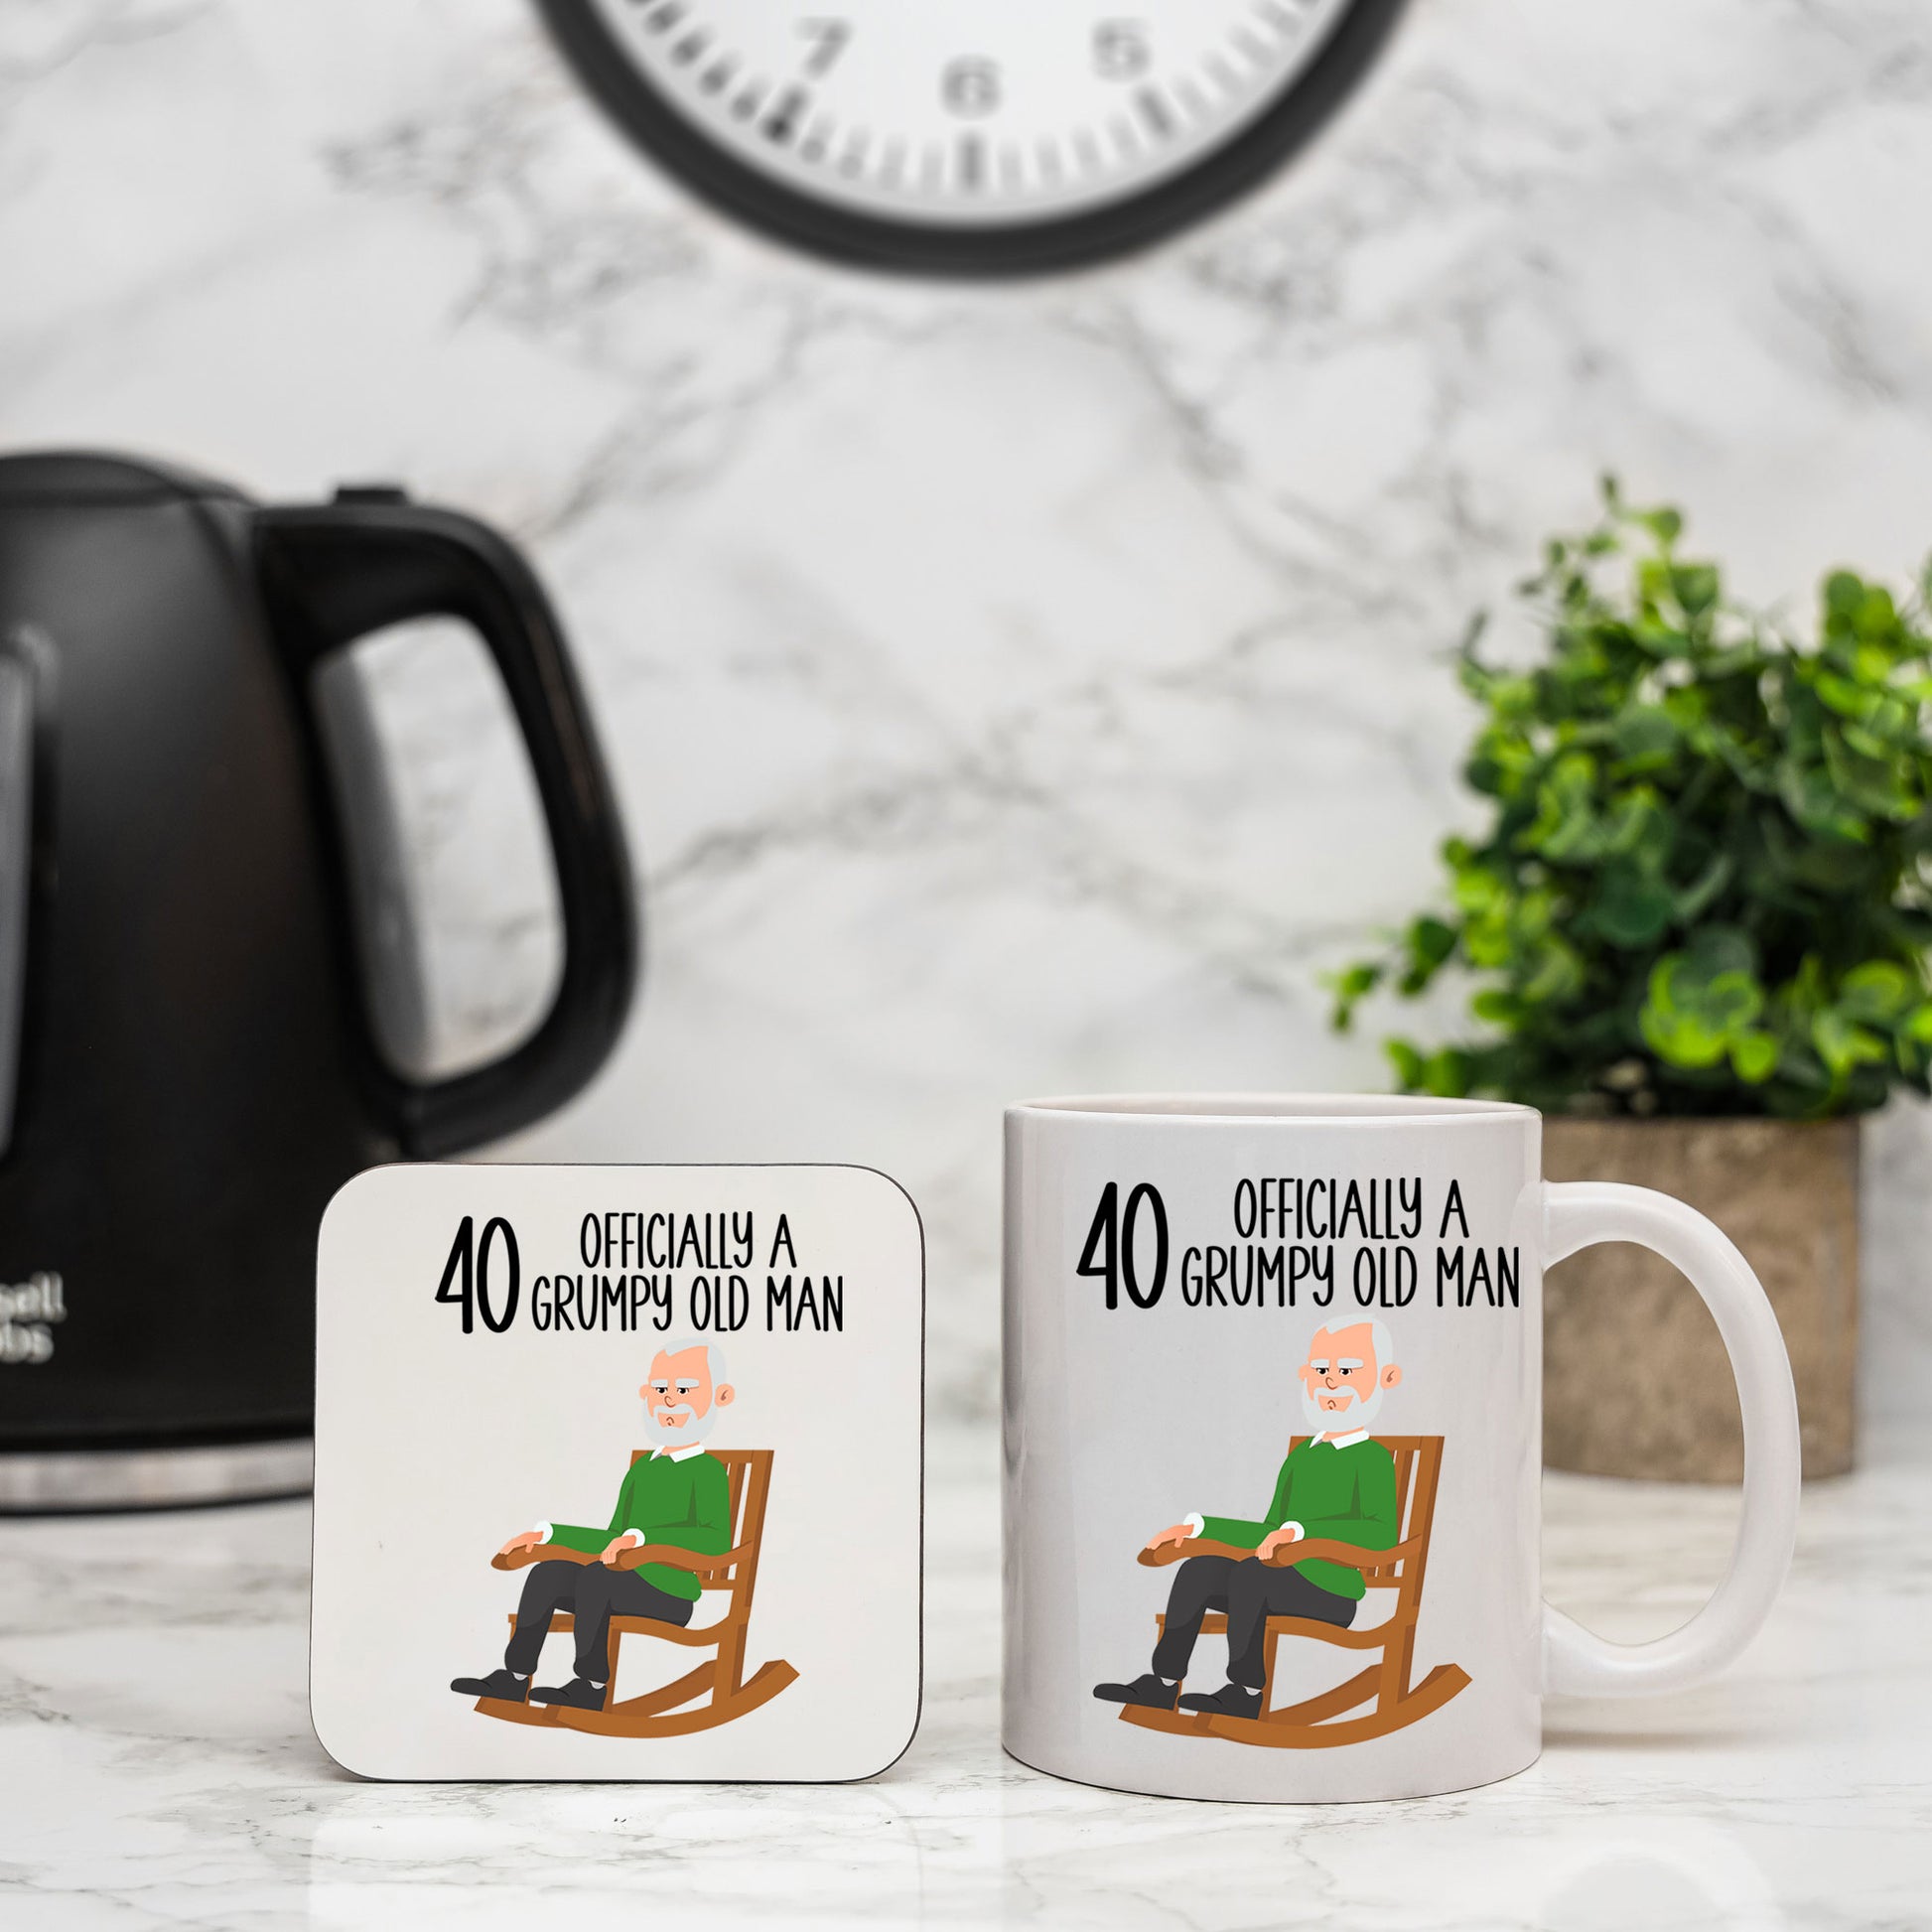 40 Officially A Grumpy Old Man Mug and/or Coaster Gift  - Always Looking Good -   